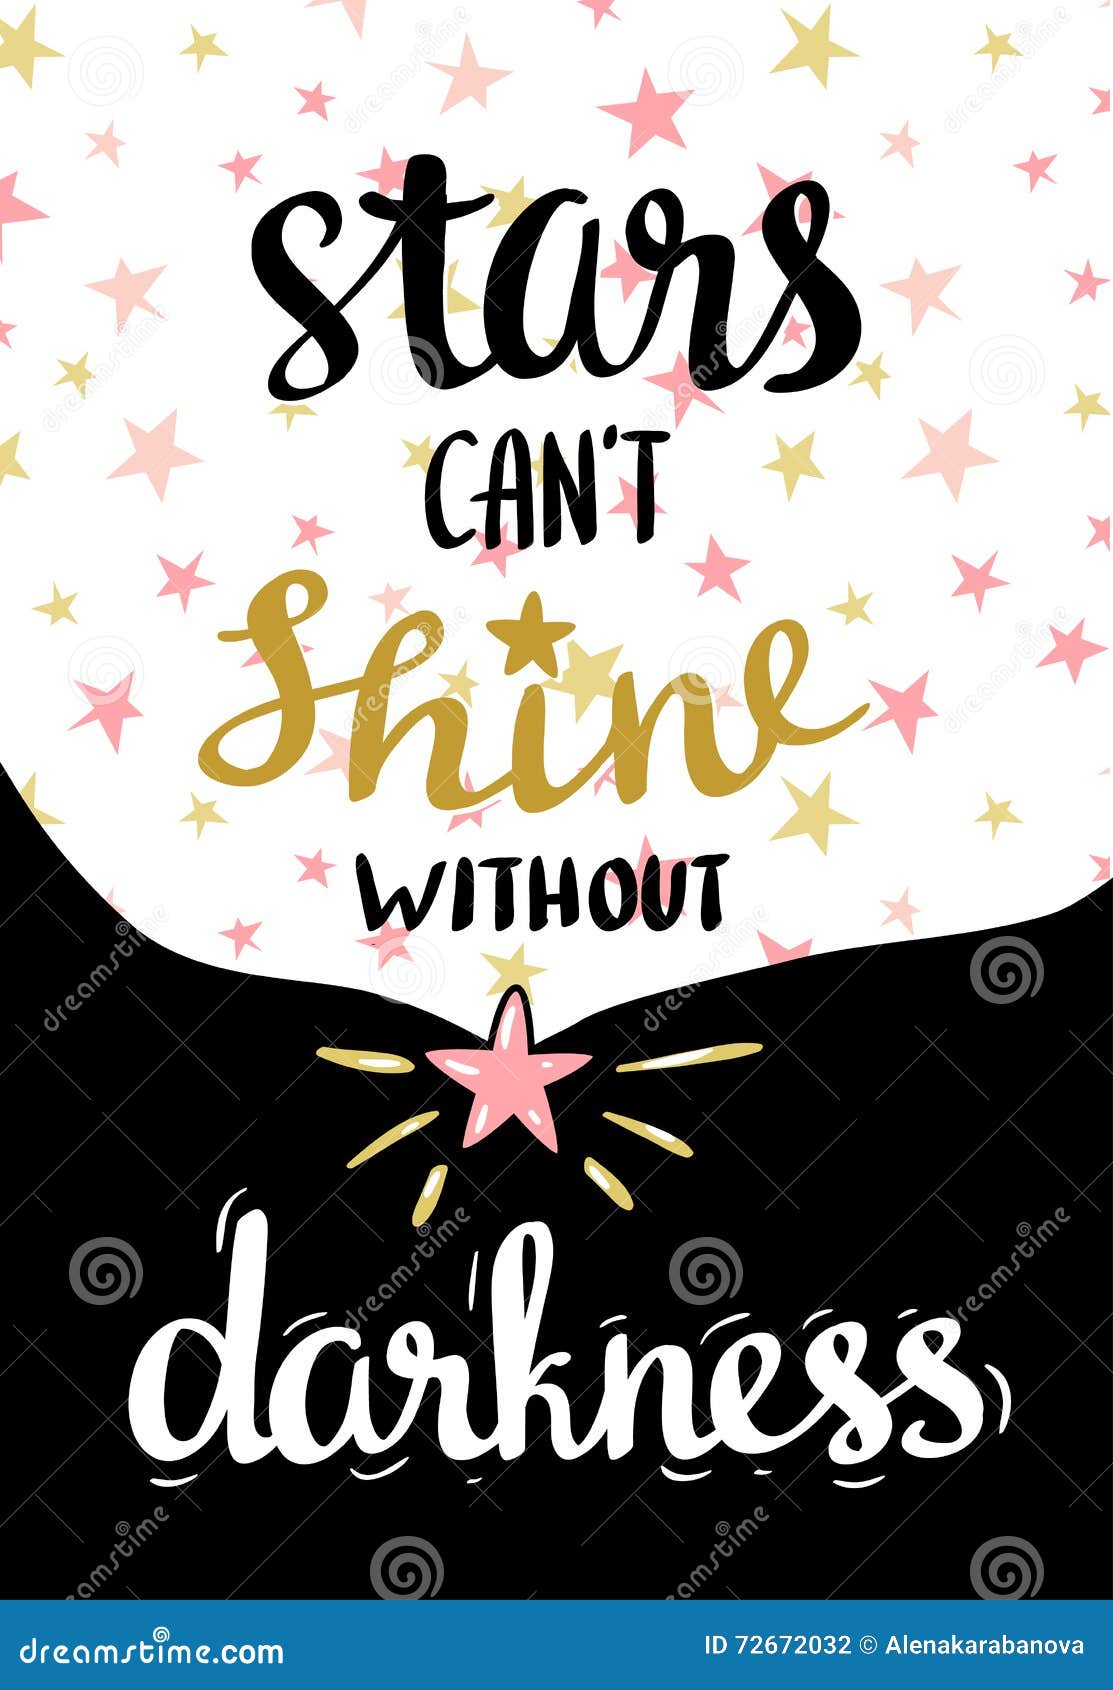 stars can't shine without darkness.  hand drawn typography poster. lettered calligraphic .